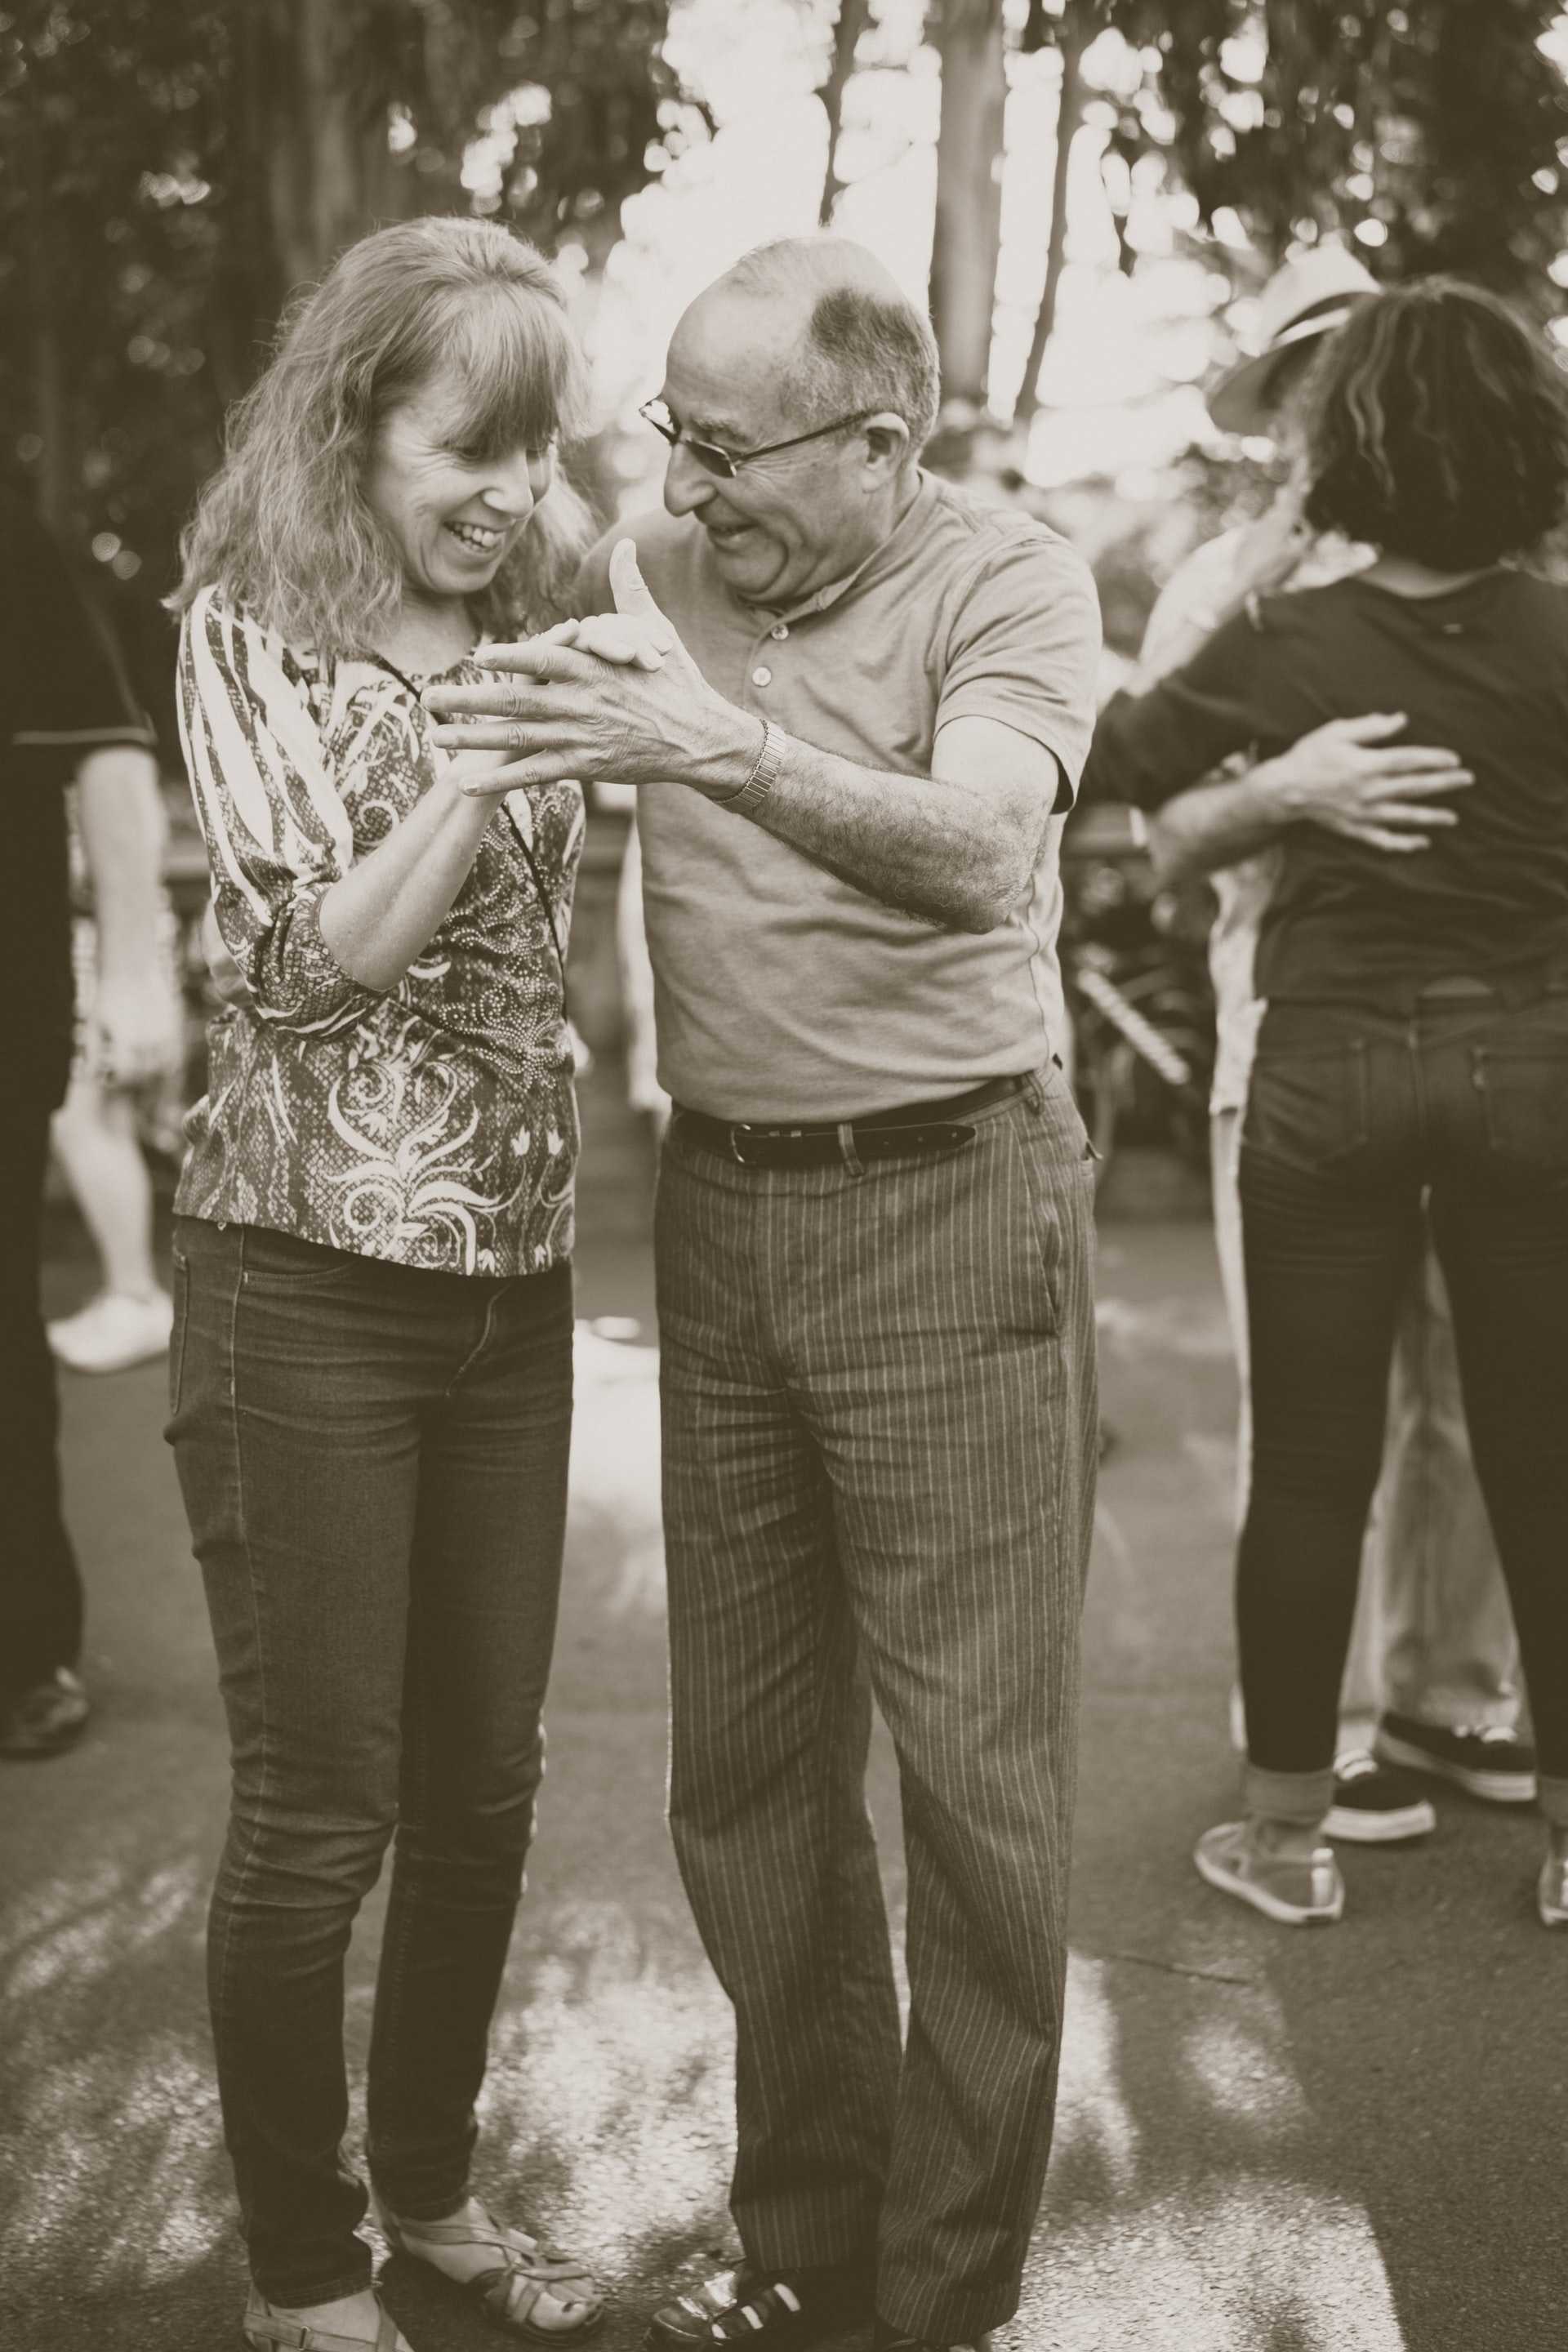 Elderly couples dance in a park.